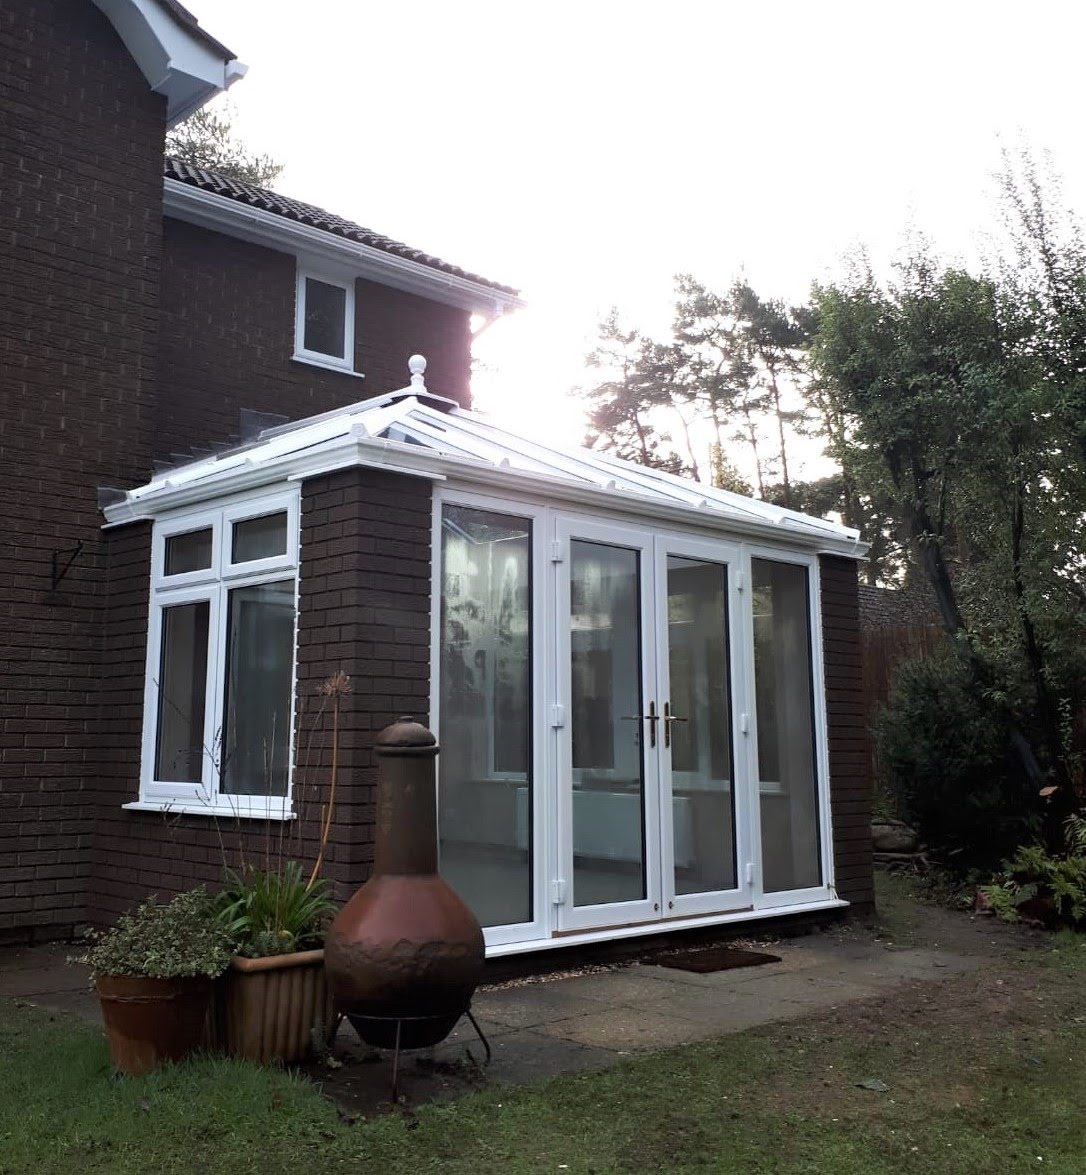 Brand new french doors and Livin room conservatory.